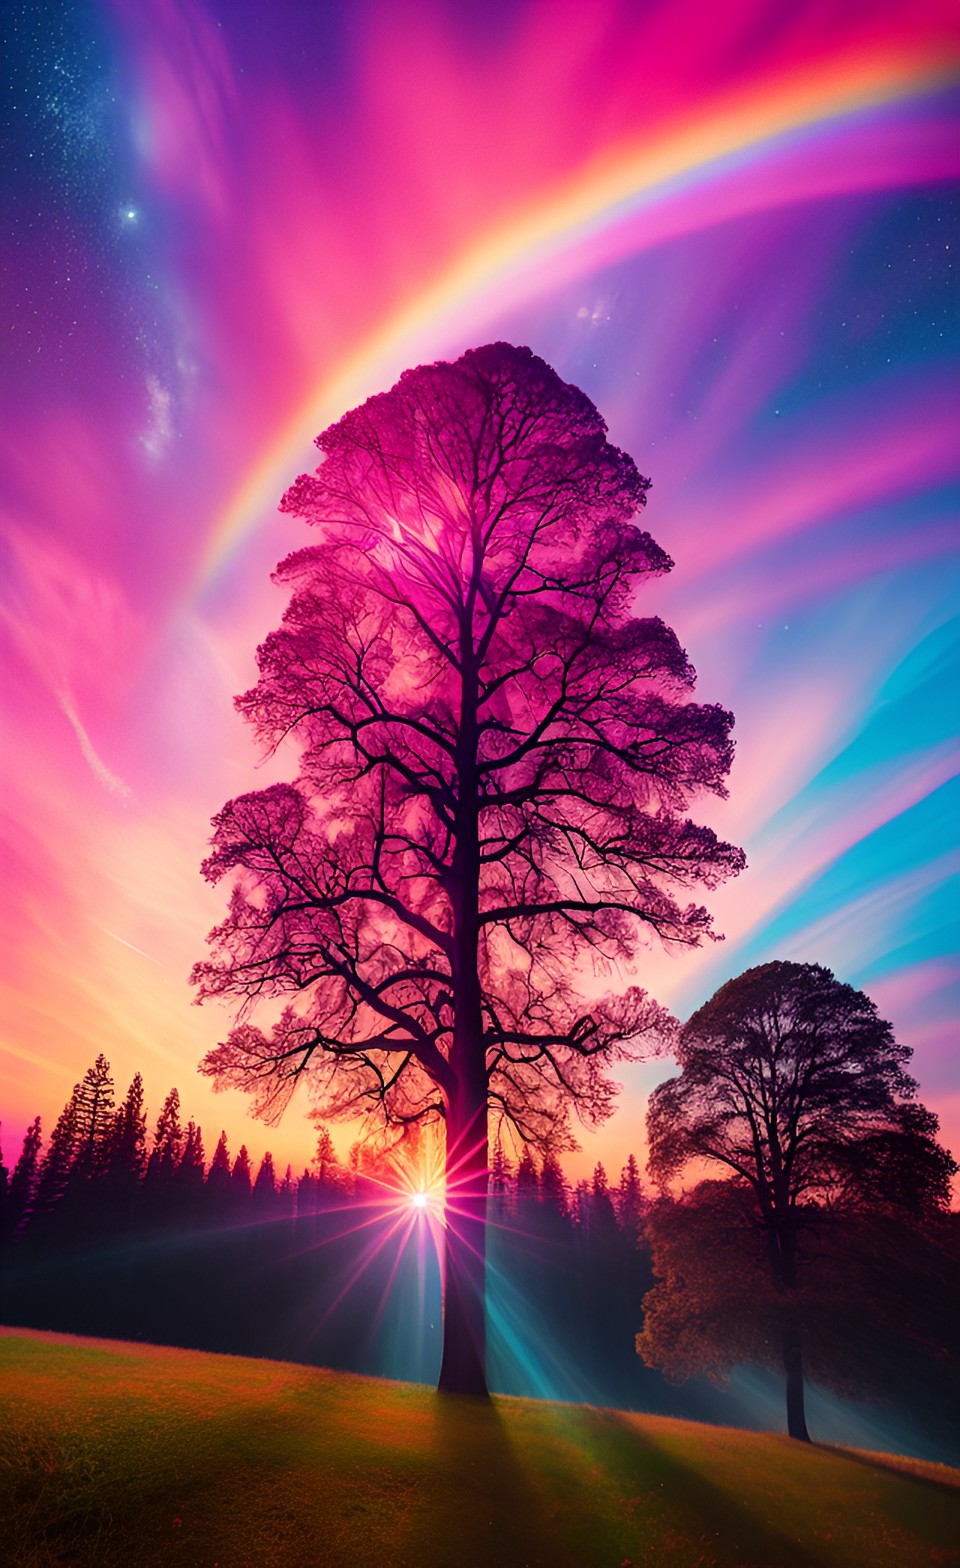 Sunset - pink sunset with rainbow trees and an orange sun with a starry night sky above preview